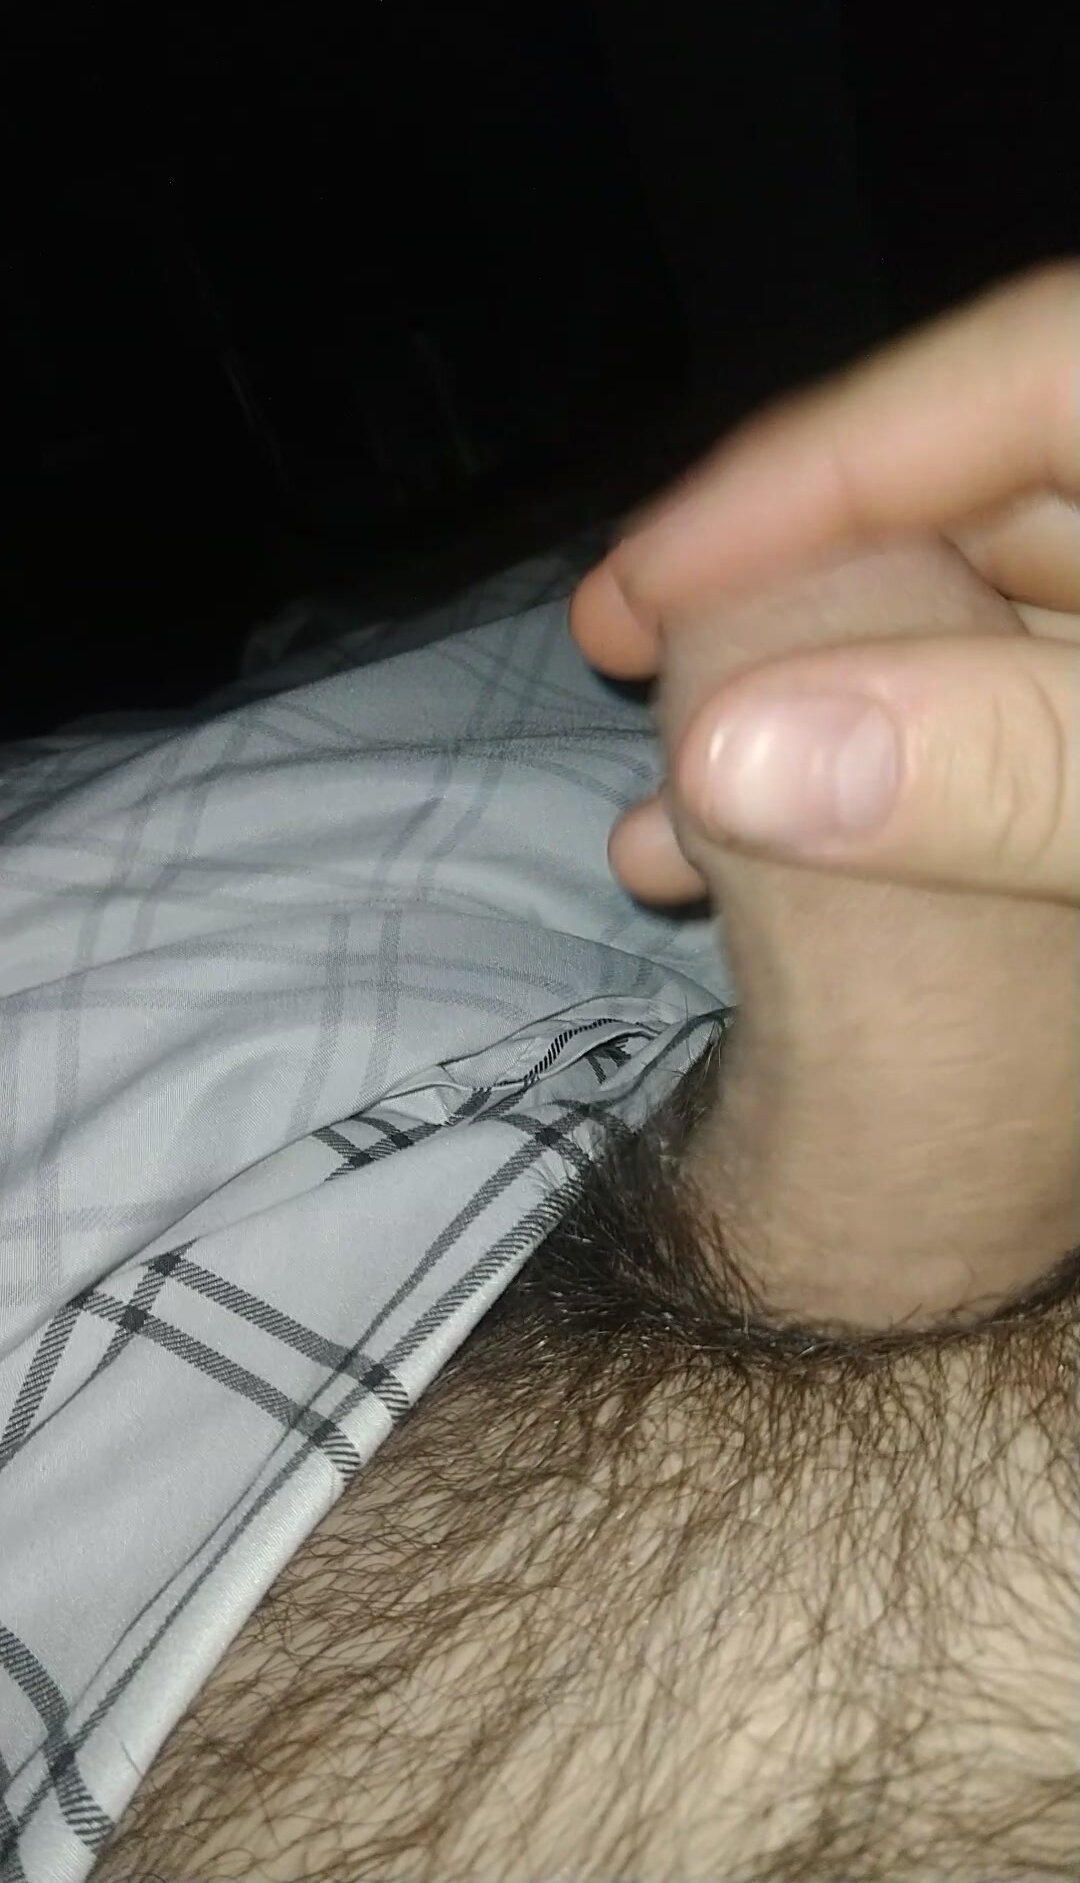 Soft cock - video 6